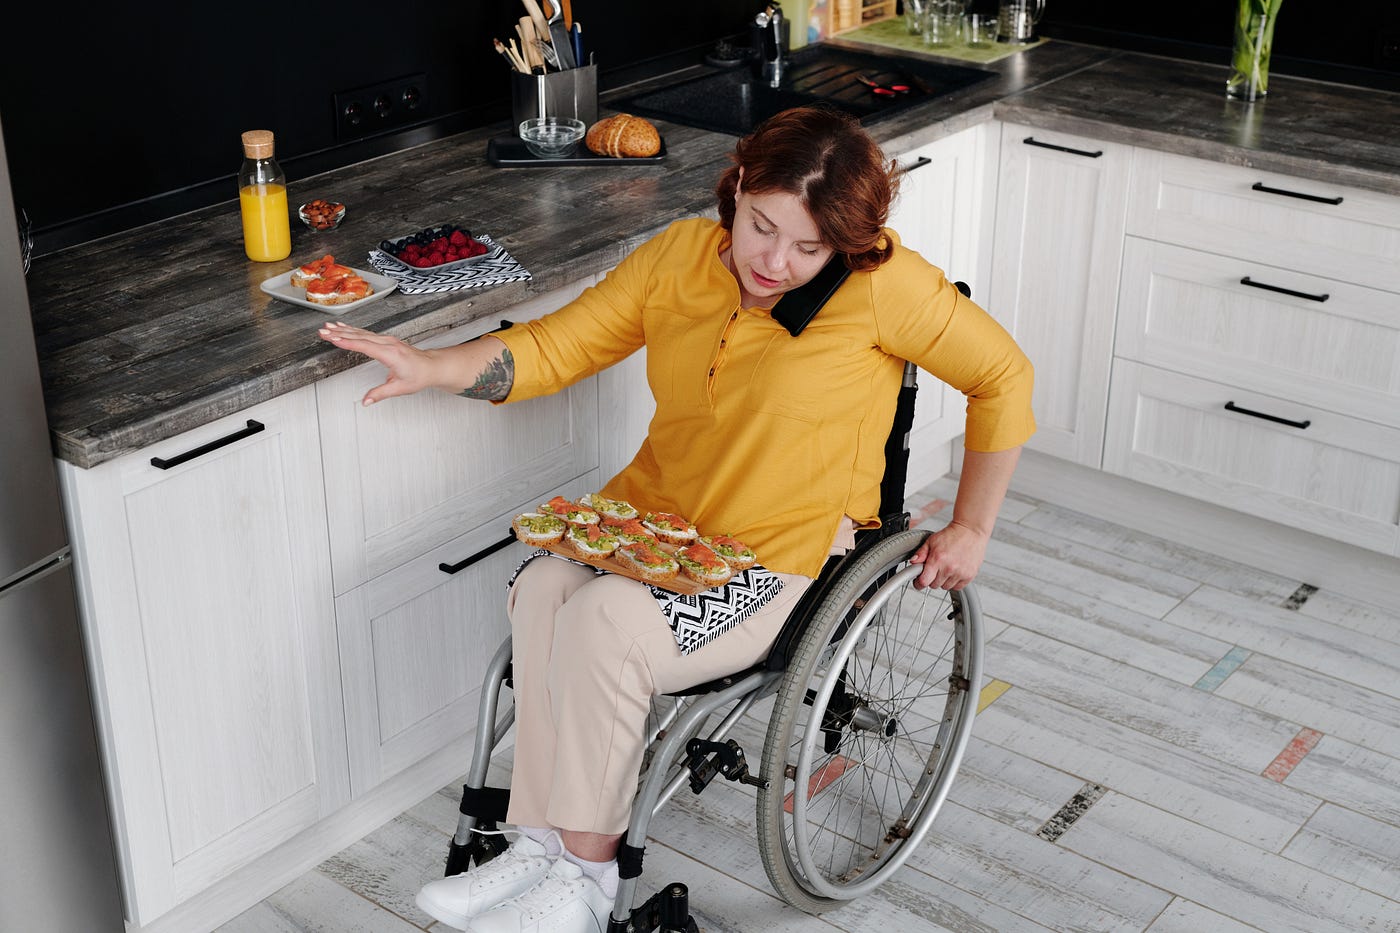 Adaptive and Accessible Kitchens - Inclusive Living